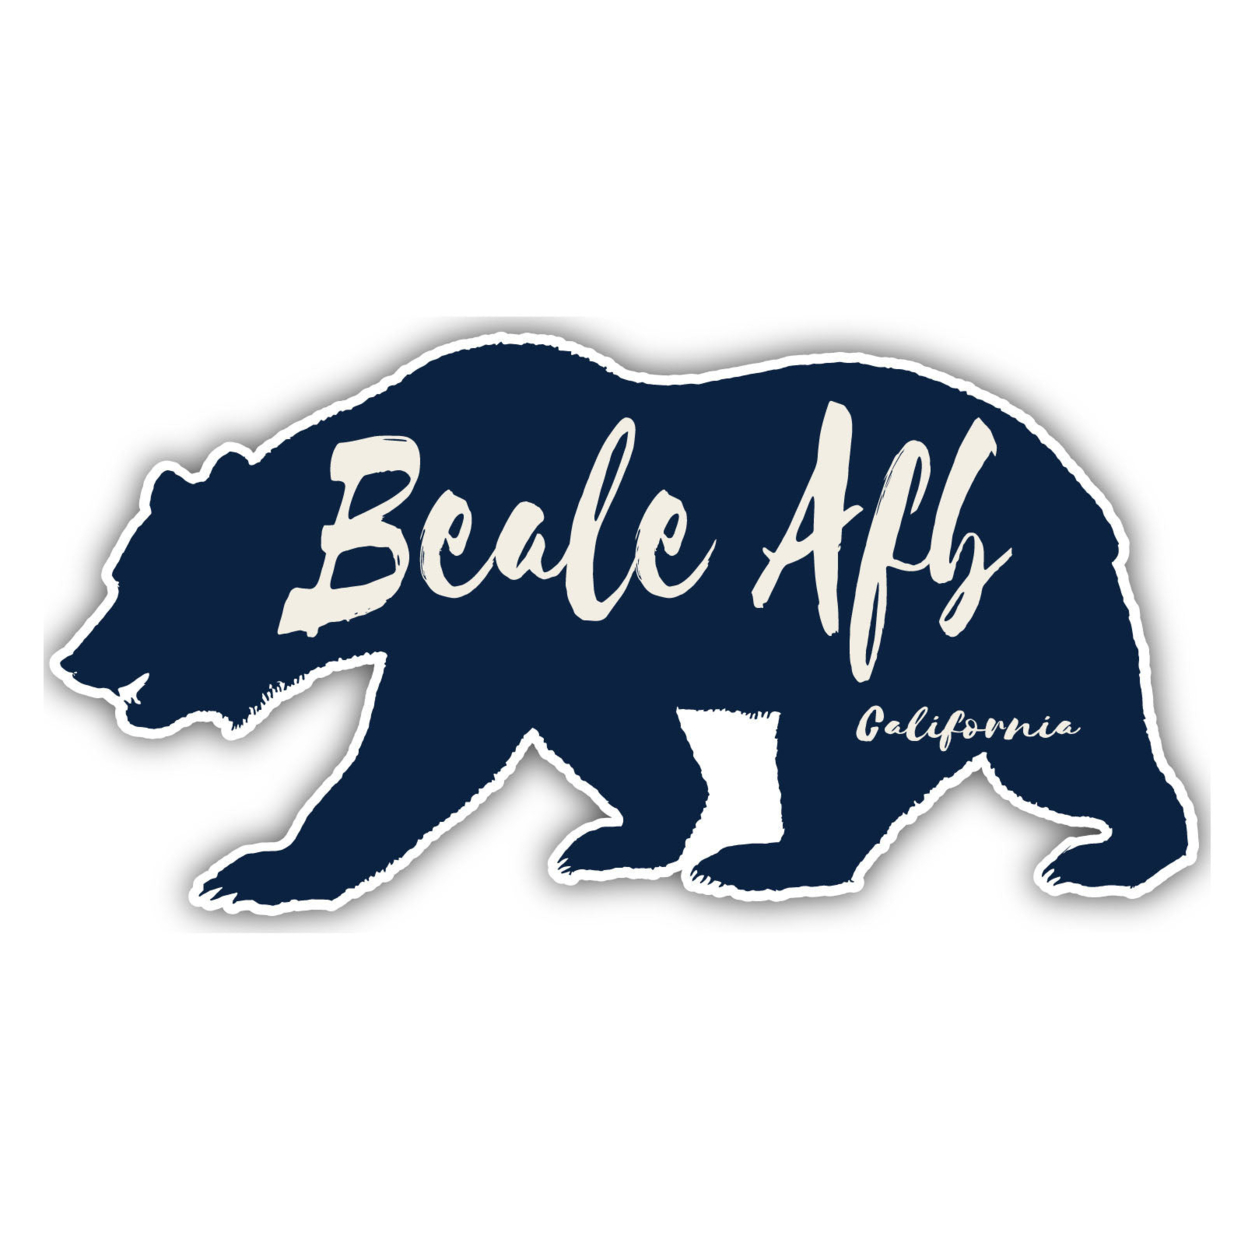 Beale AFB California Souvenir Decorative Stickers (Choose Theme And Size) - 4-Pack, 12-Inch, Bear